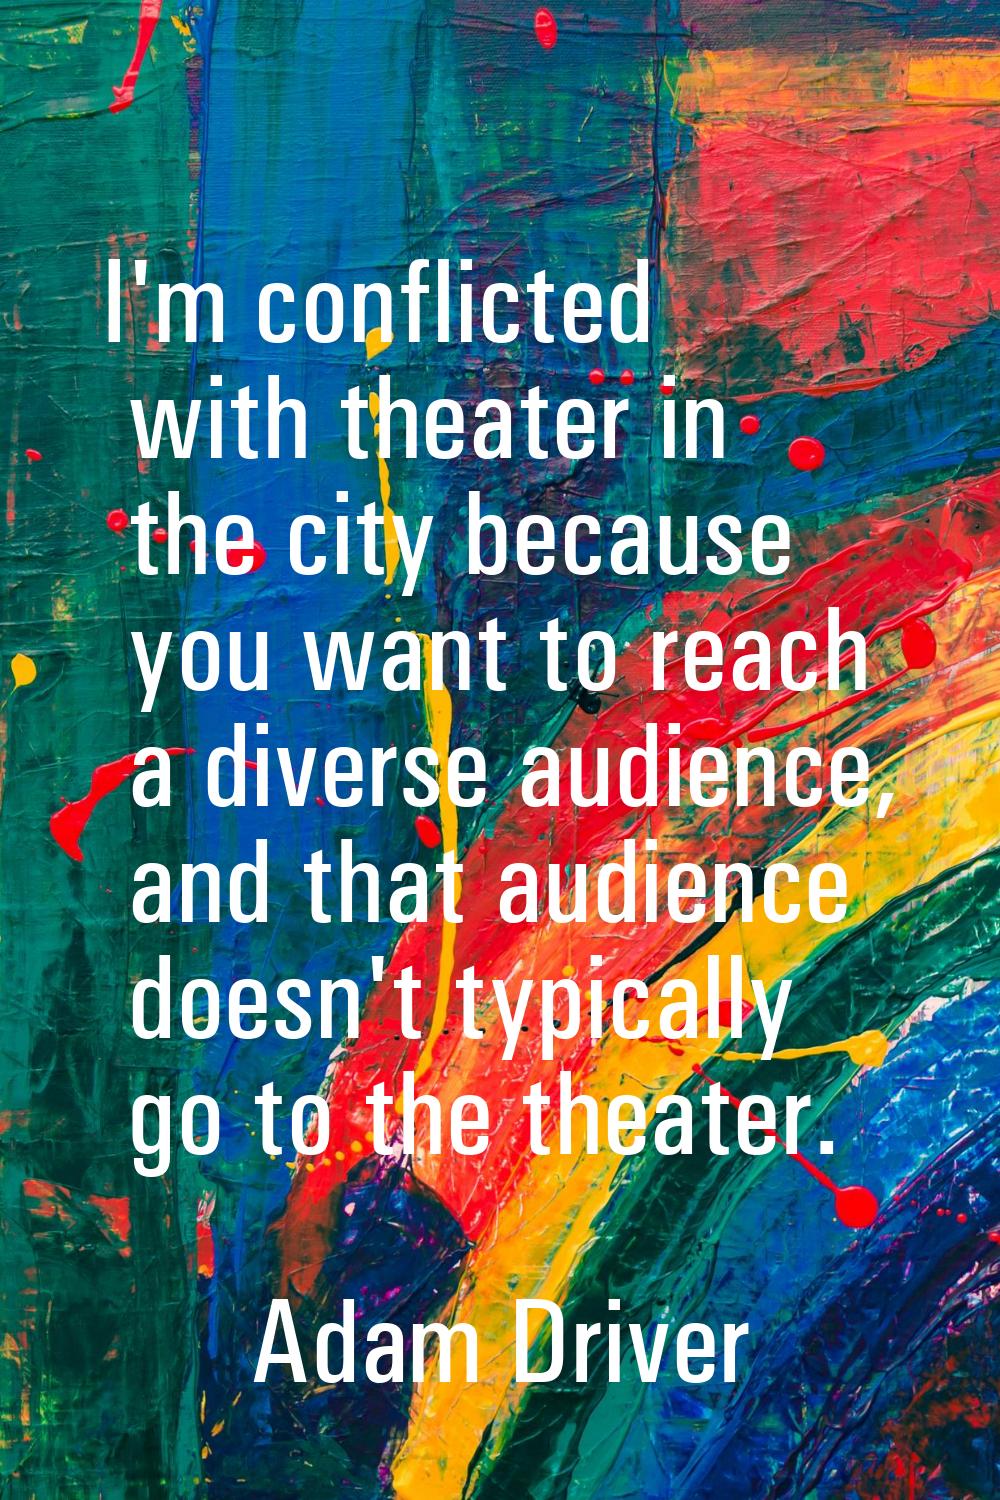 I'm conflicted with theater in the city because you want to reach a diverse audience, and that audi